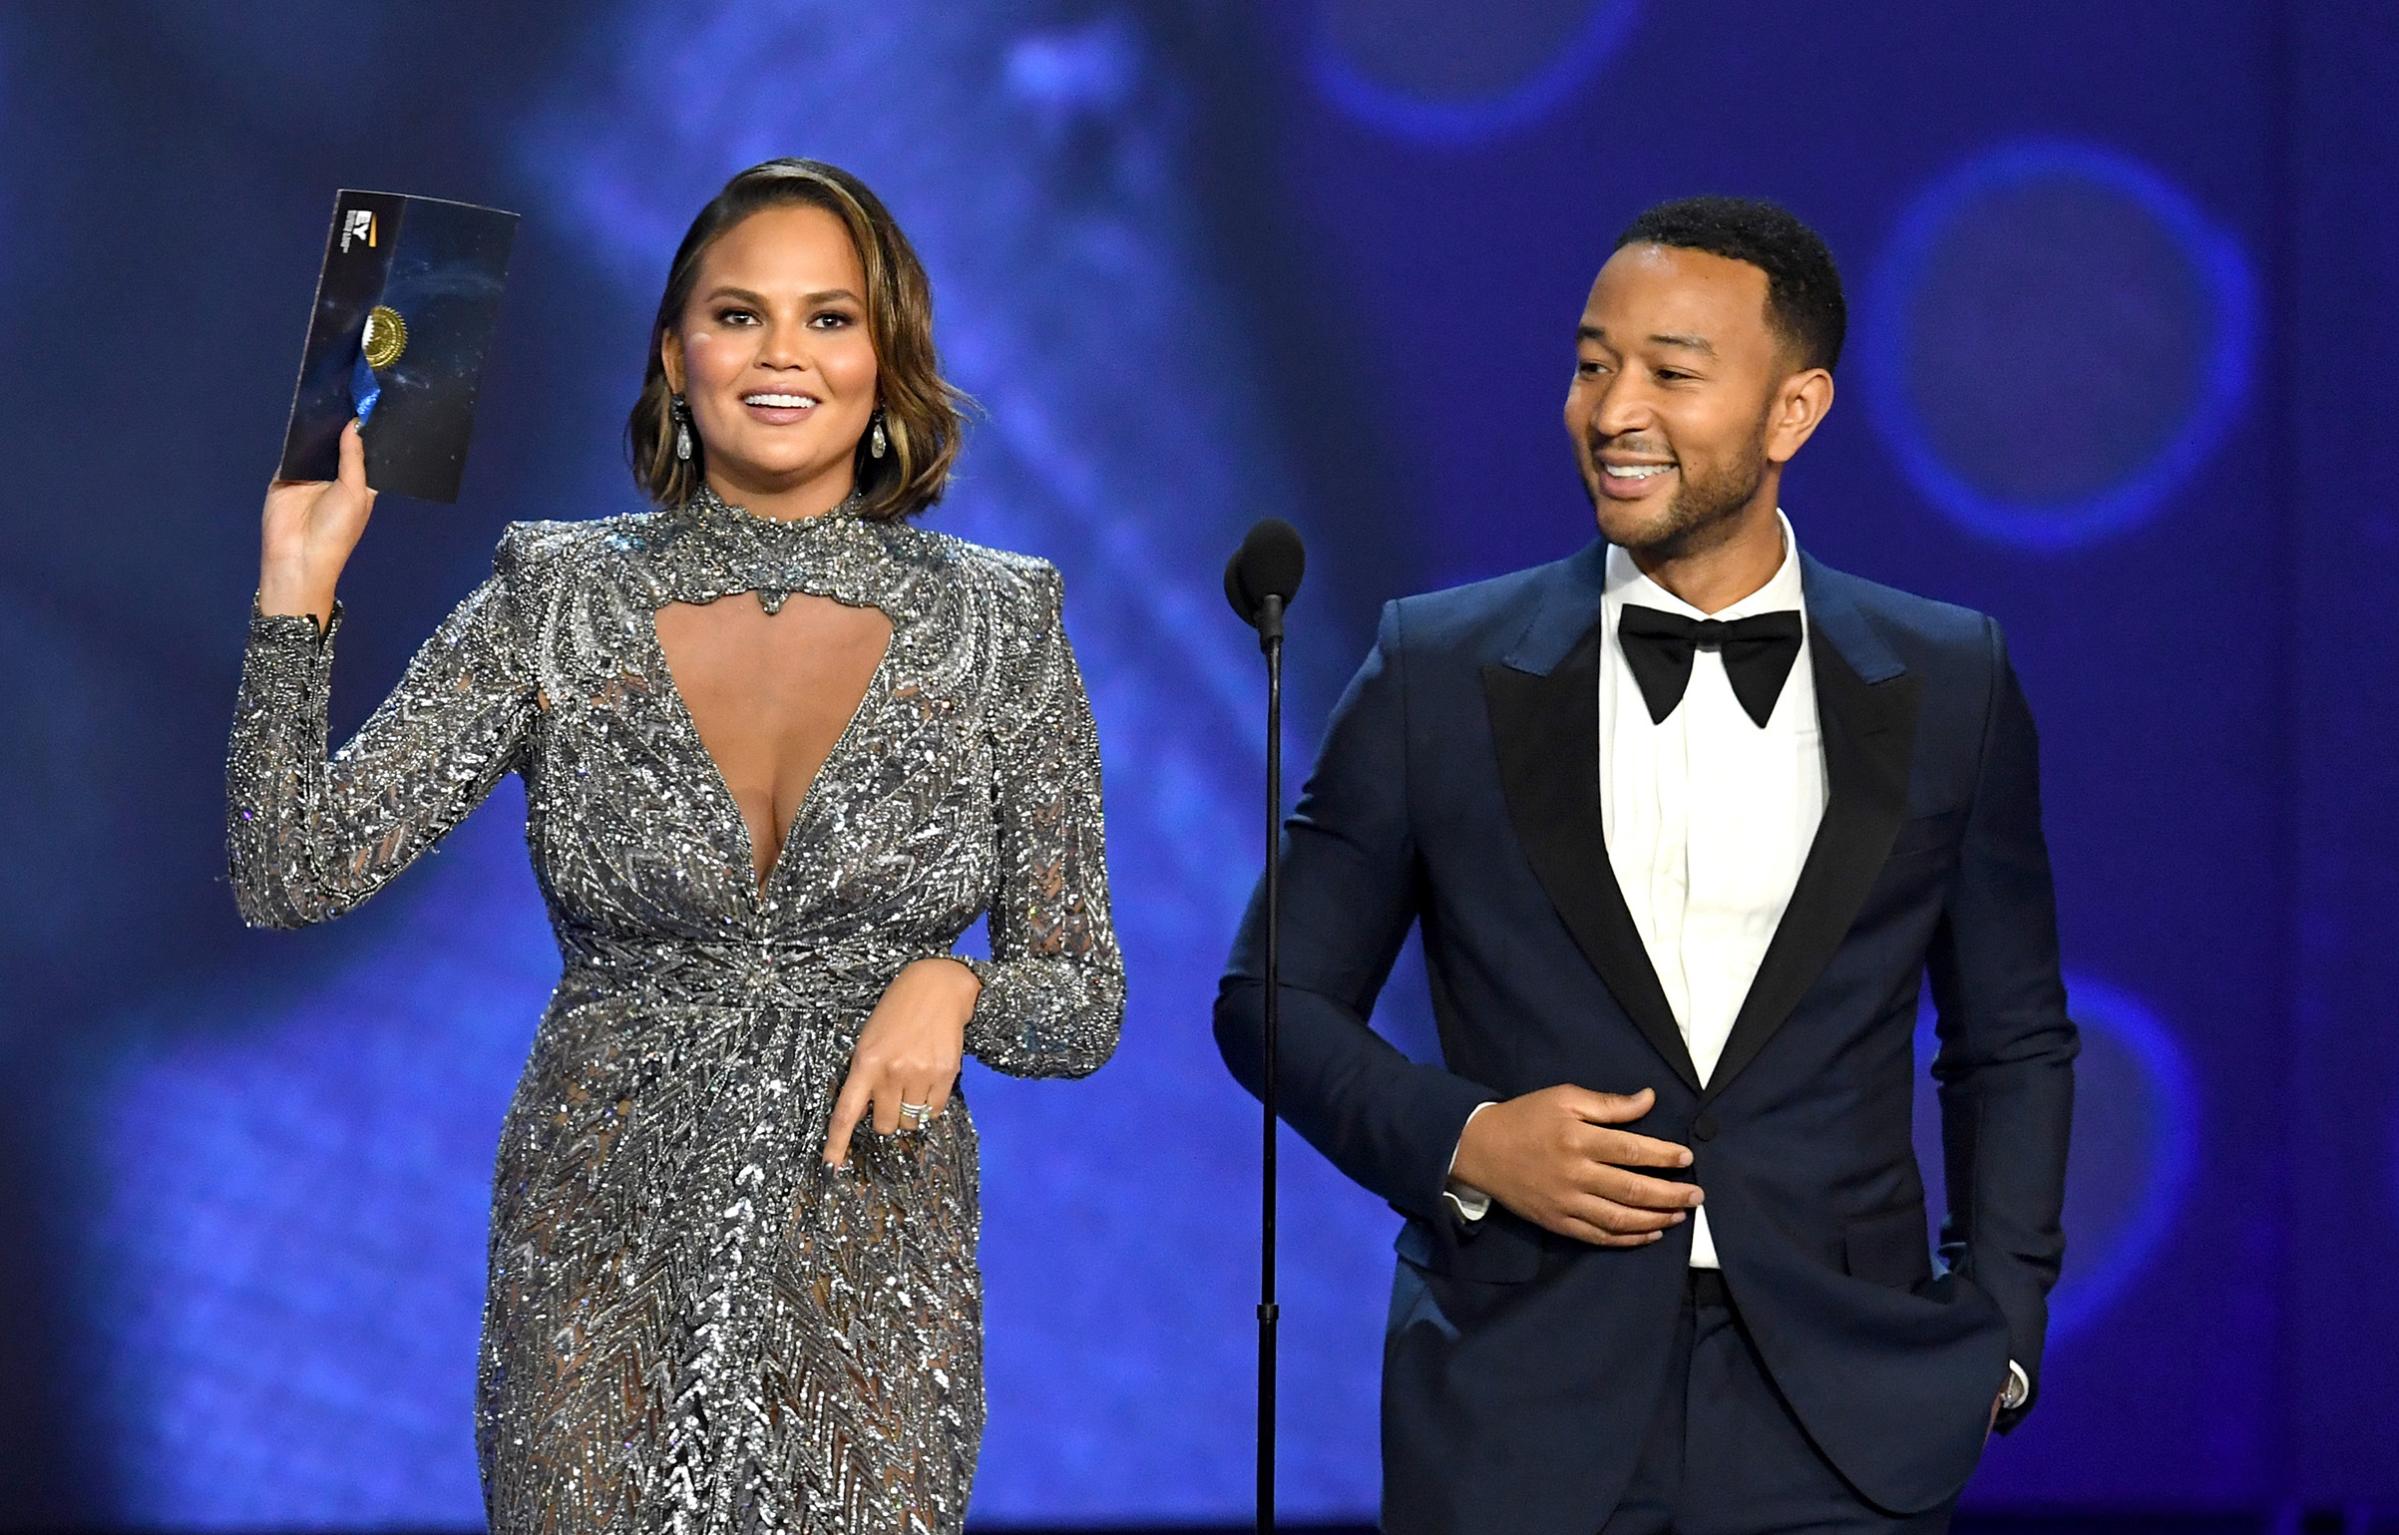 Chrissy Teigen and John Legend speak onstage during the 70th Emmy Awards at Microsoft Theater on Sept. 17, 2018 in Los Angeles.